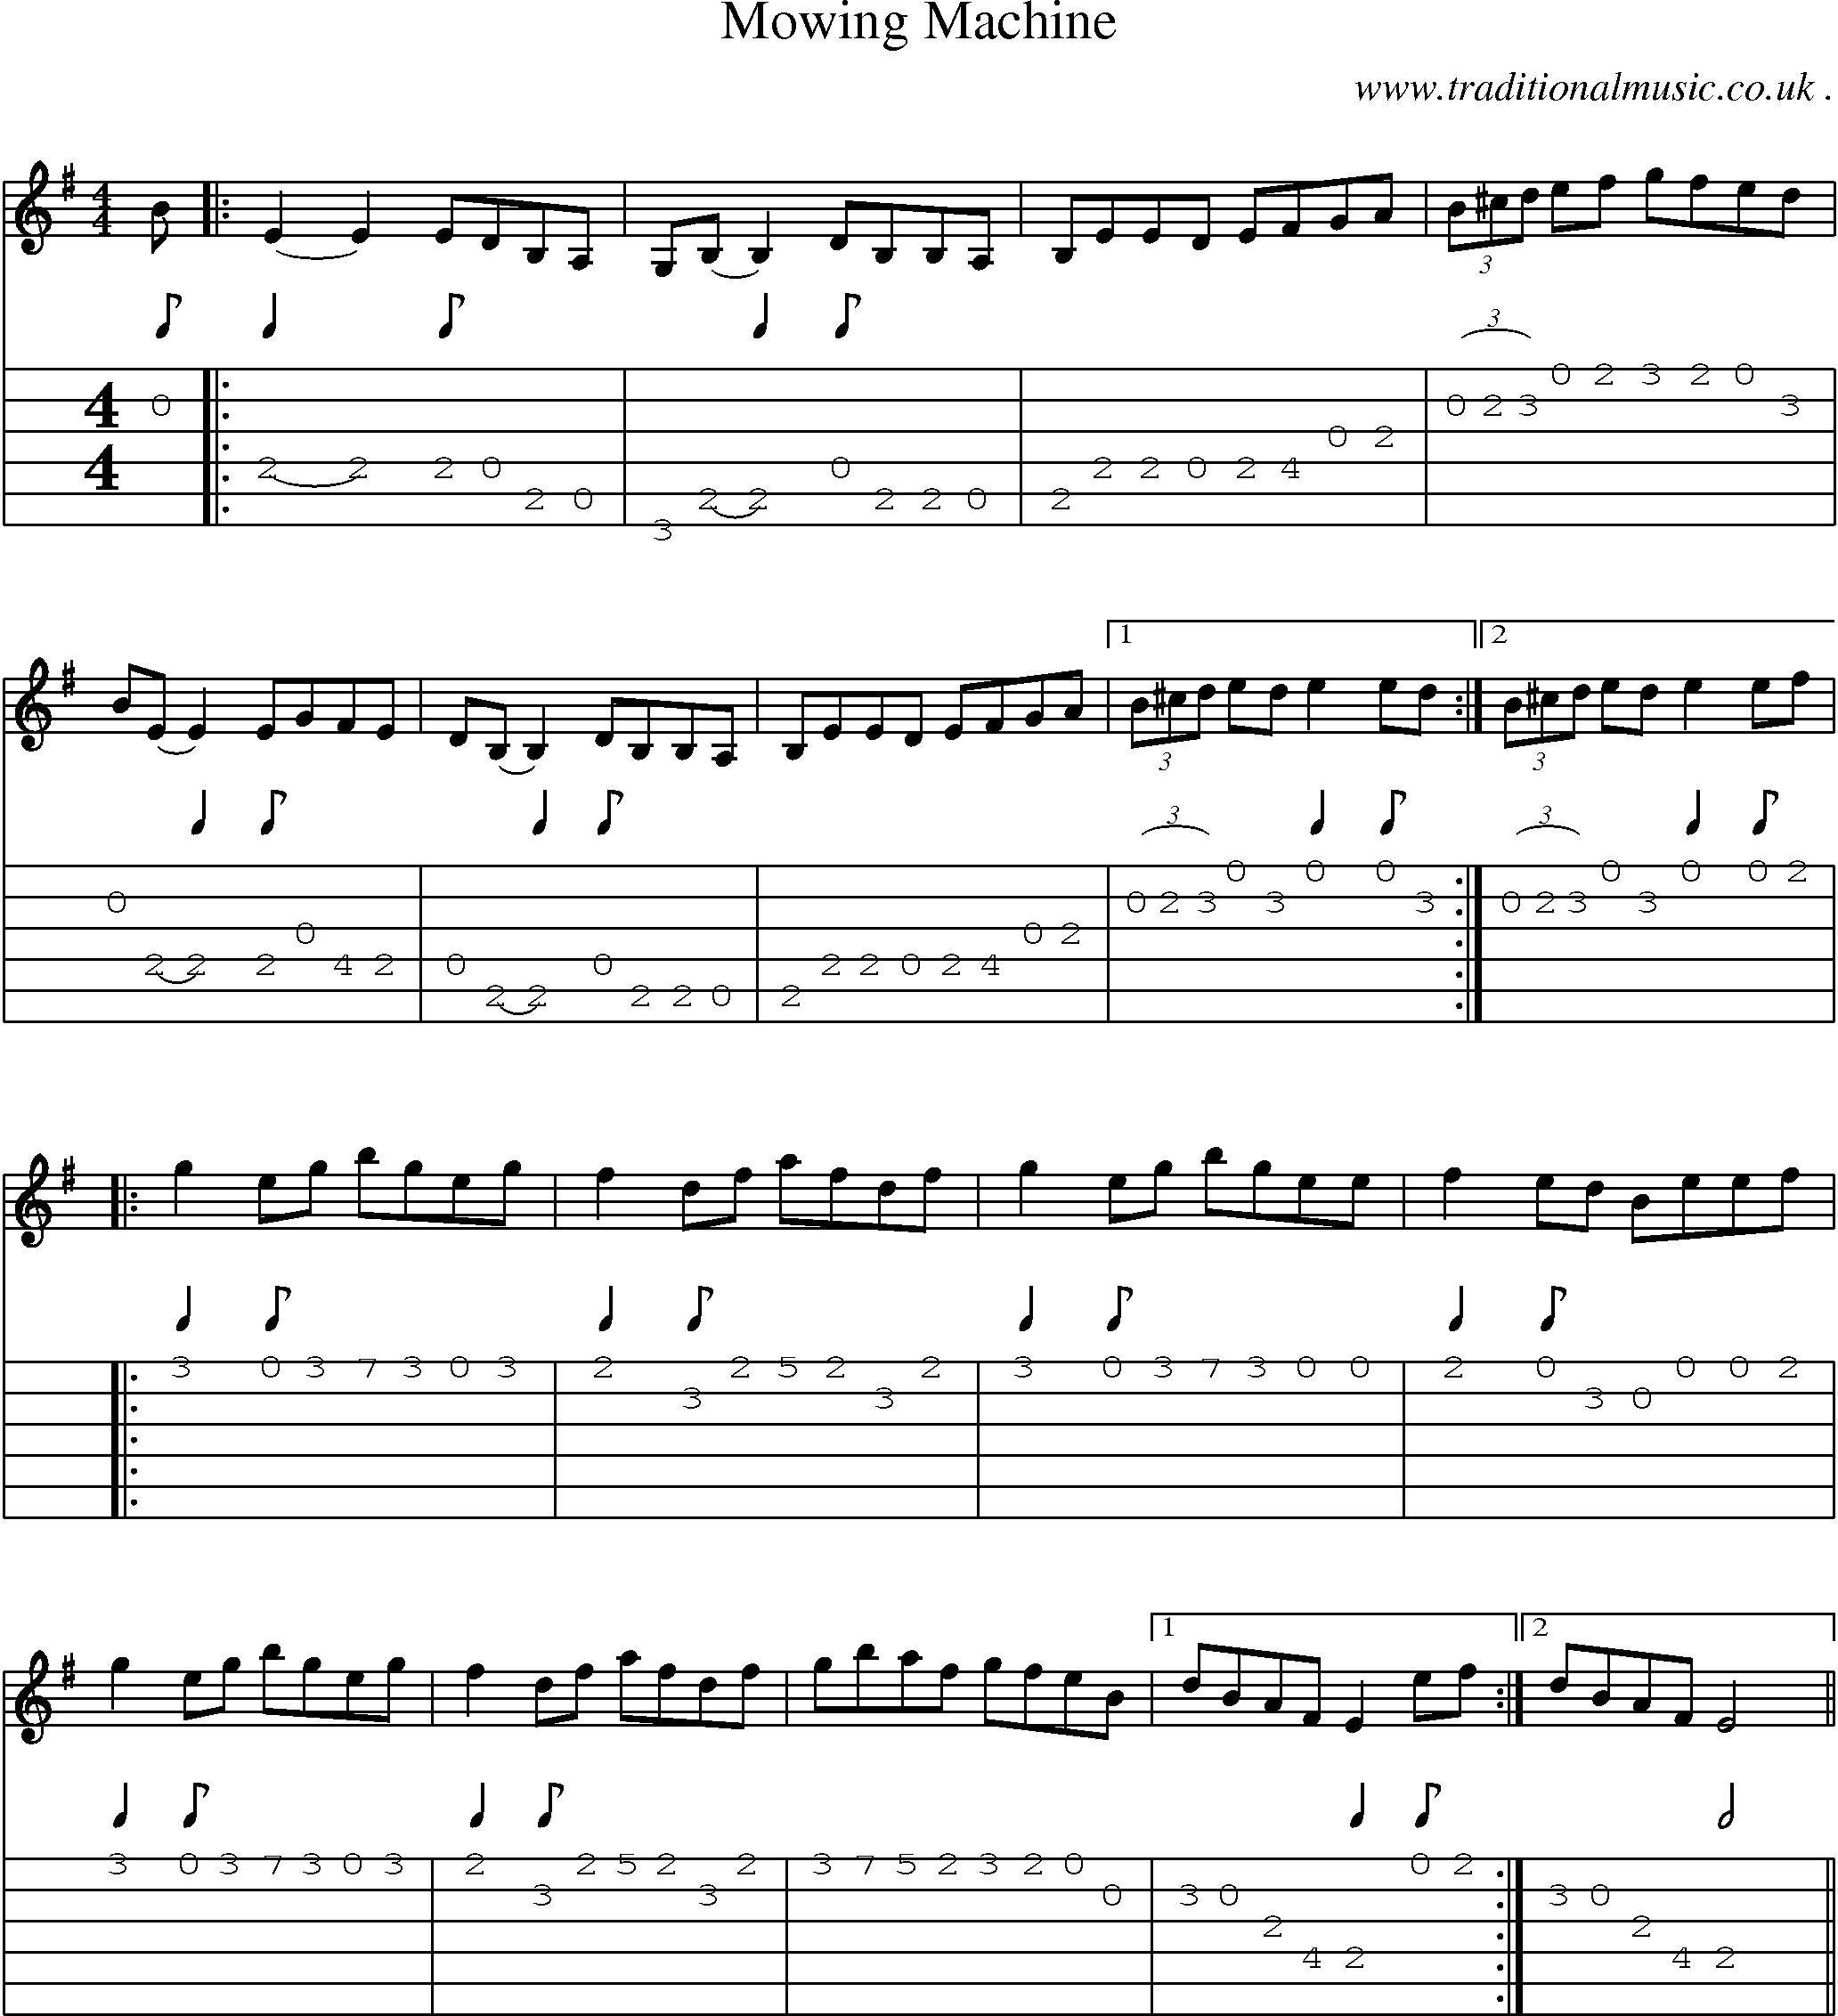 Sheet-Music and Guitar Tabs for Mowing Machine